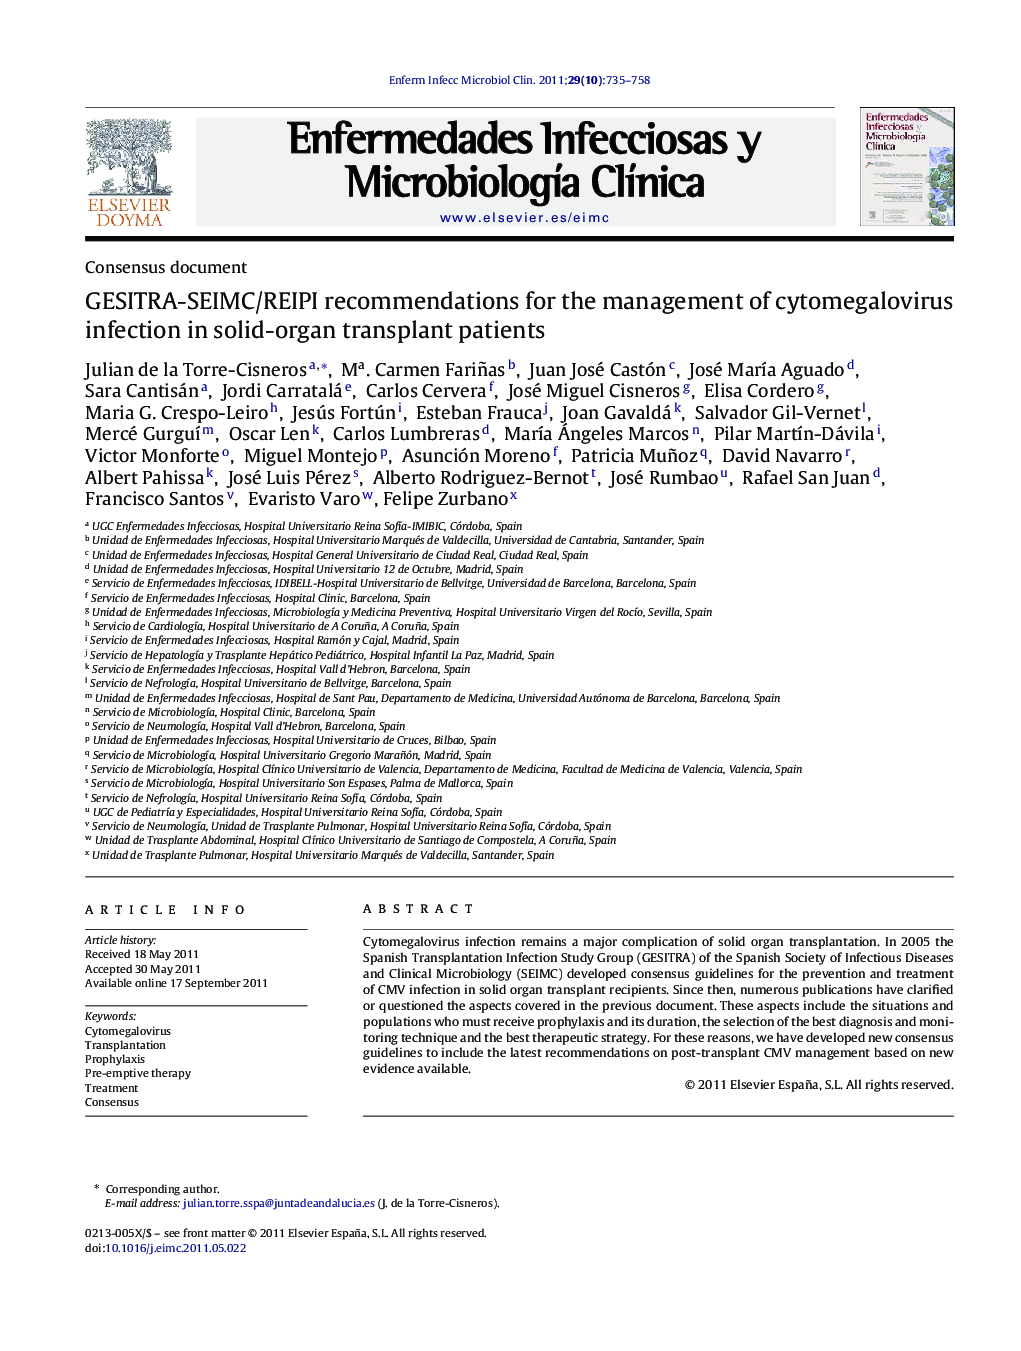 GESITRA-SEIMC/REIPI recommendations for the management of cytomegalovirus infection in solid-organ transplant patients